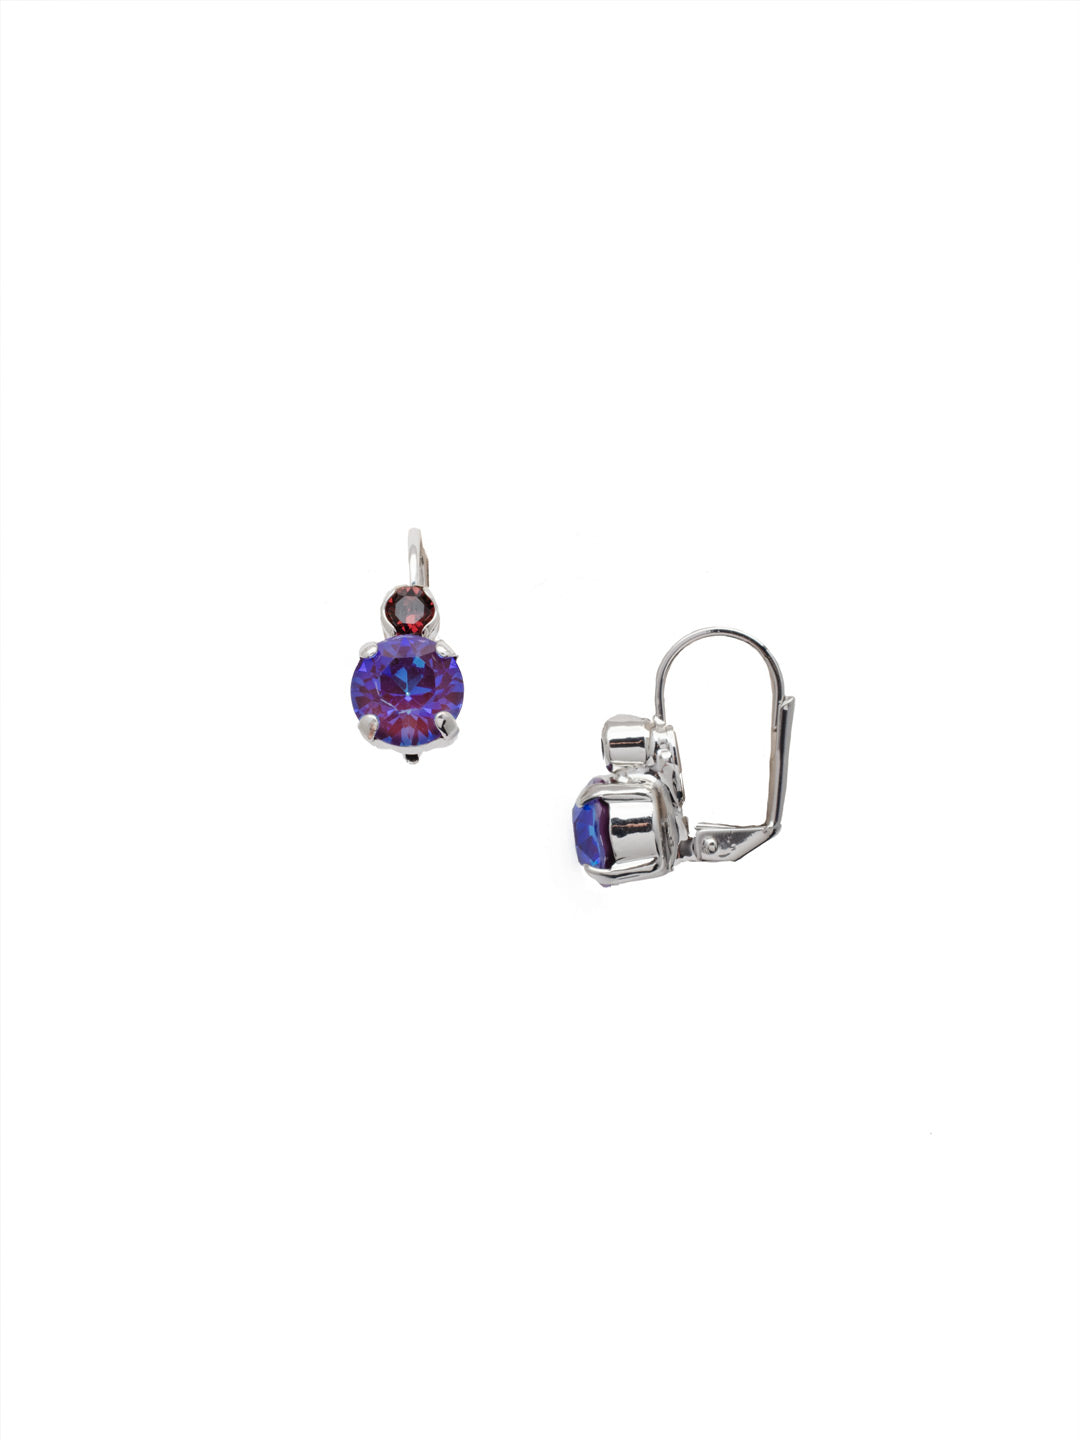 Round Crystal Dangle Earrings - ECW36PDSIP - <p>Two round crystals sit perfectly atop one another. Attached to a french wire, this is the perfect amount of sparkle for every day and every occasion. From Sorrelli's Sienna Plum collection in our Palladium finish.</p>